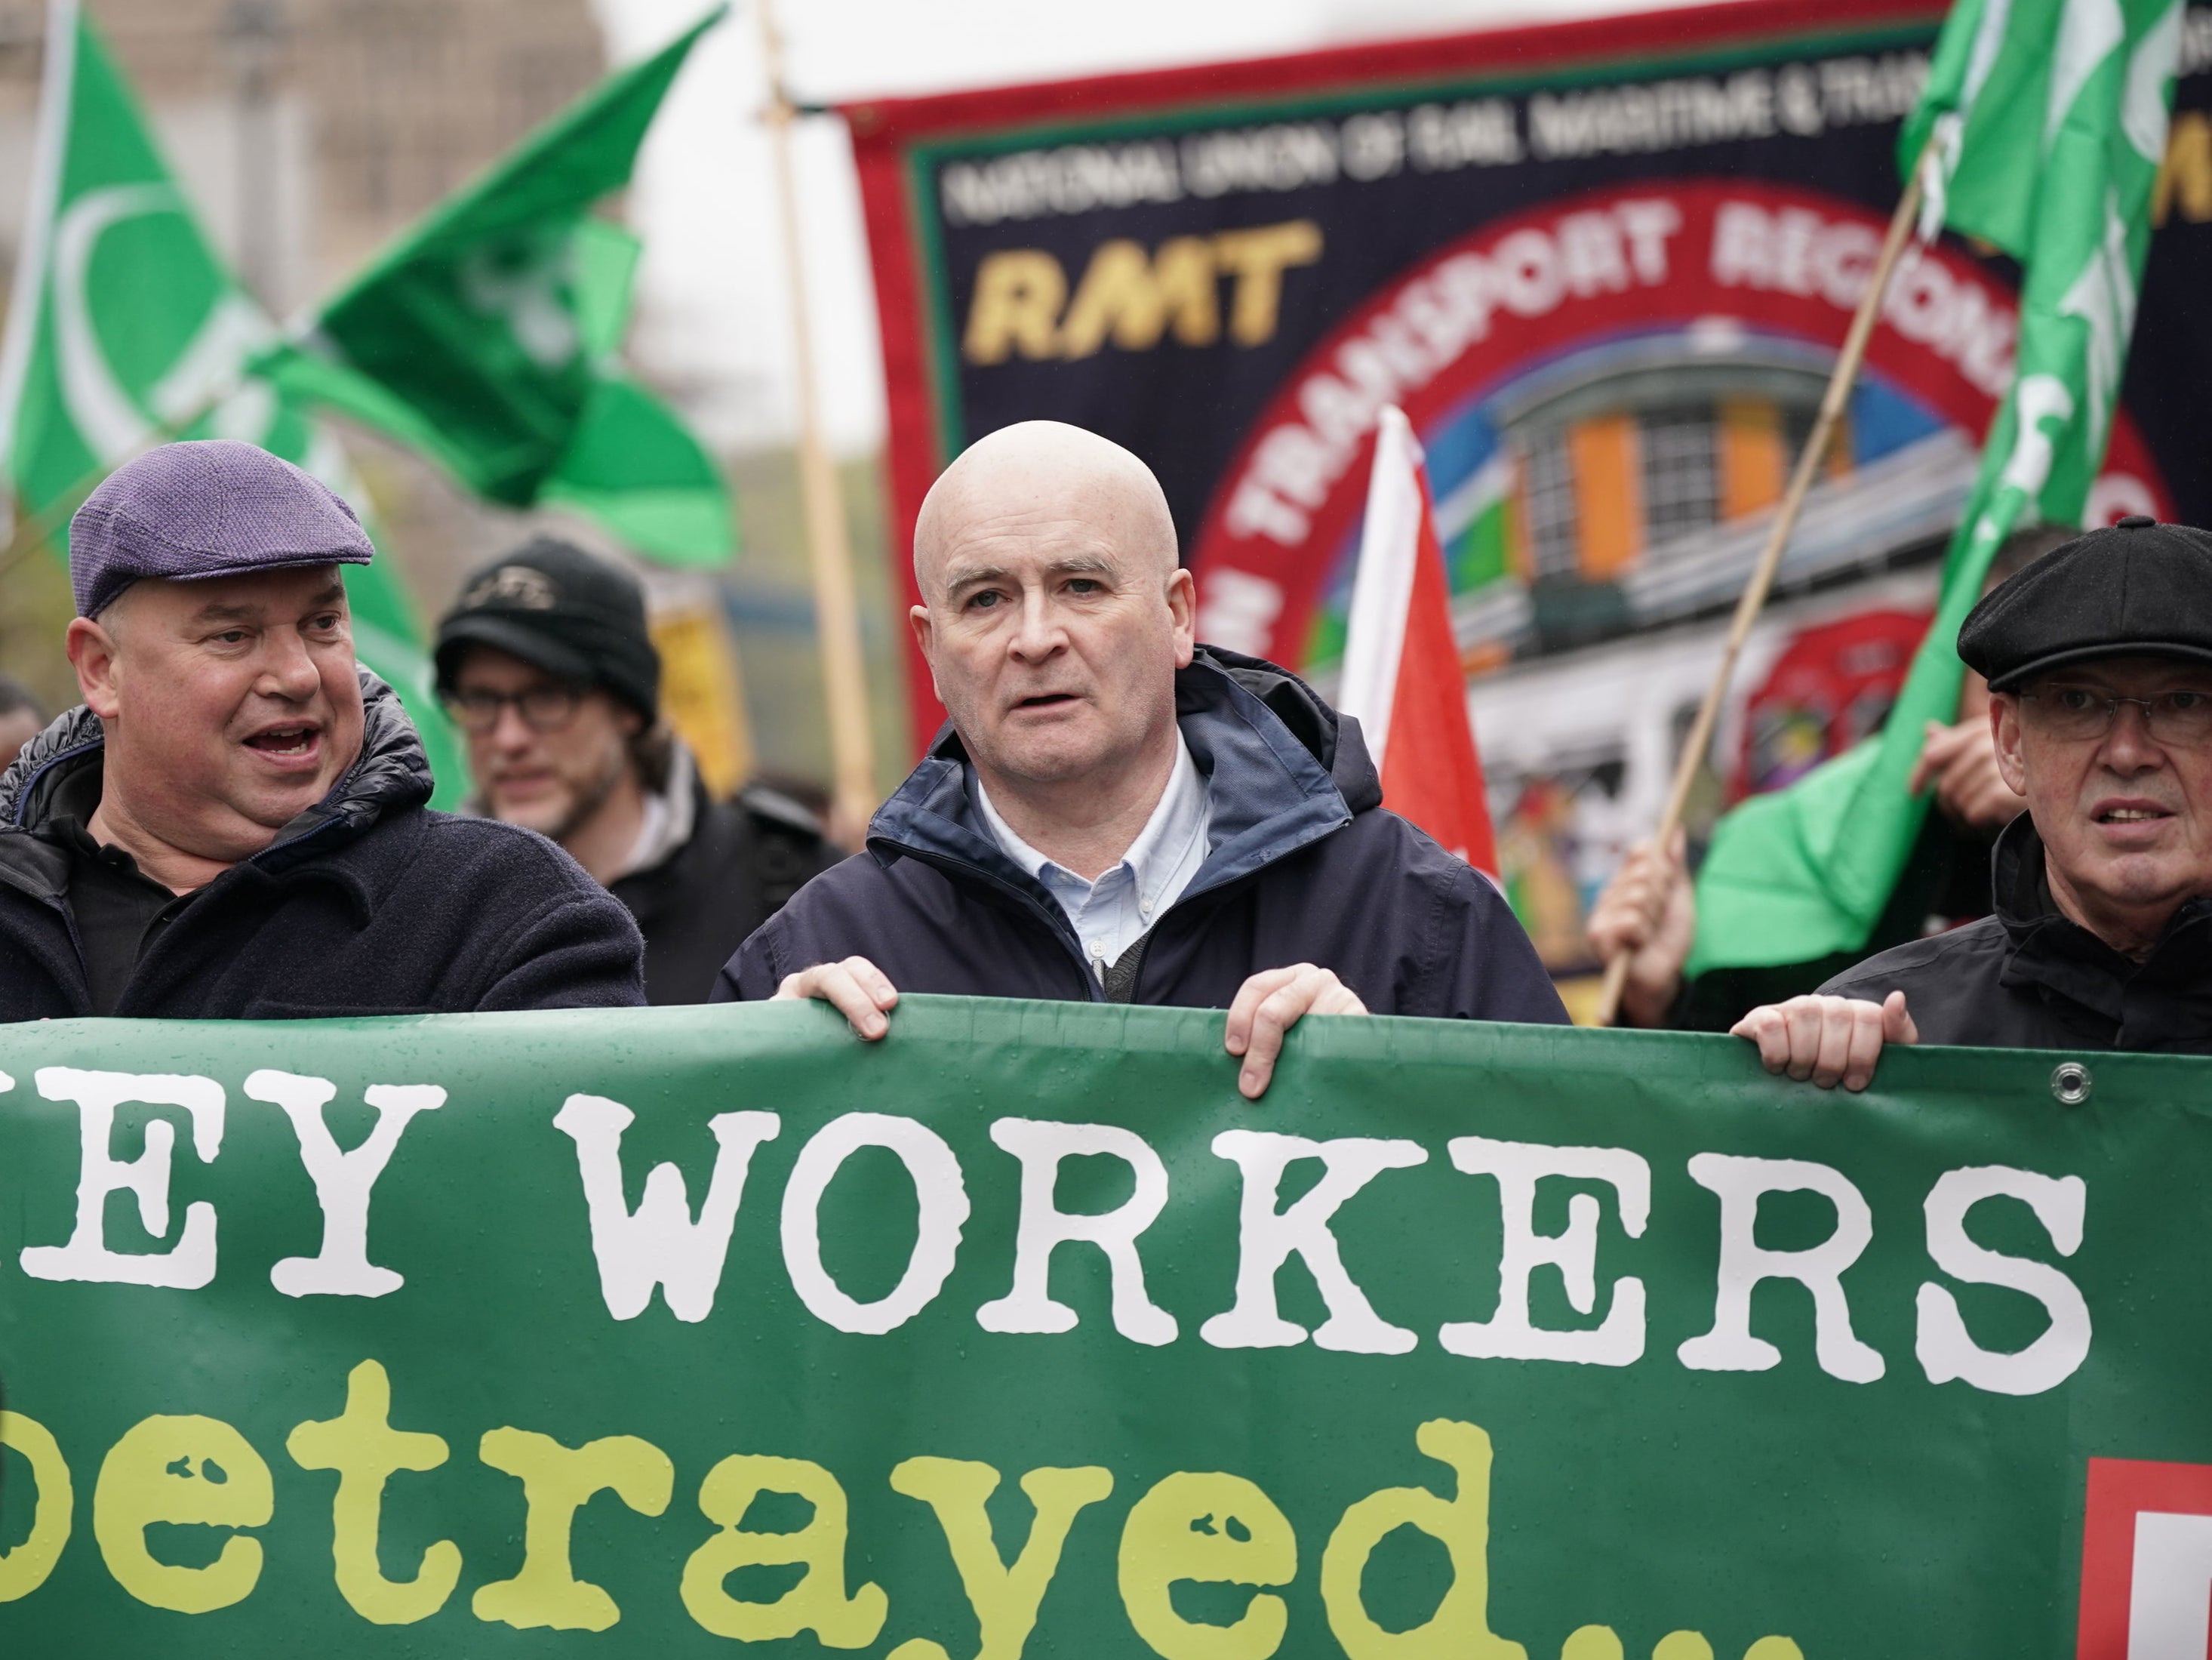 RMT chief Mick Lynch on the march